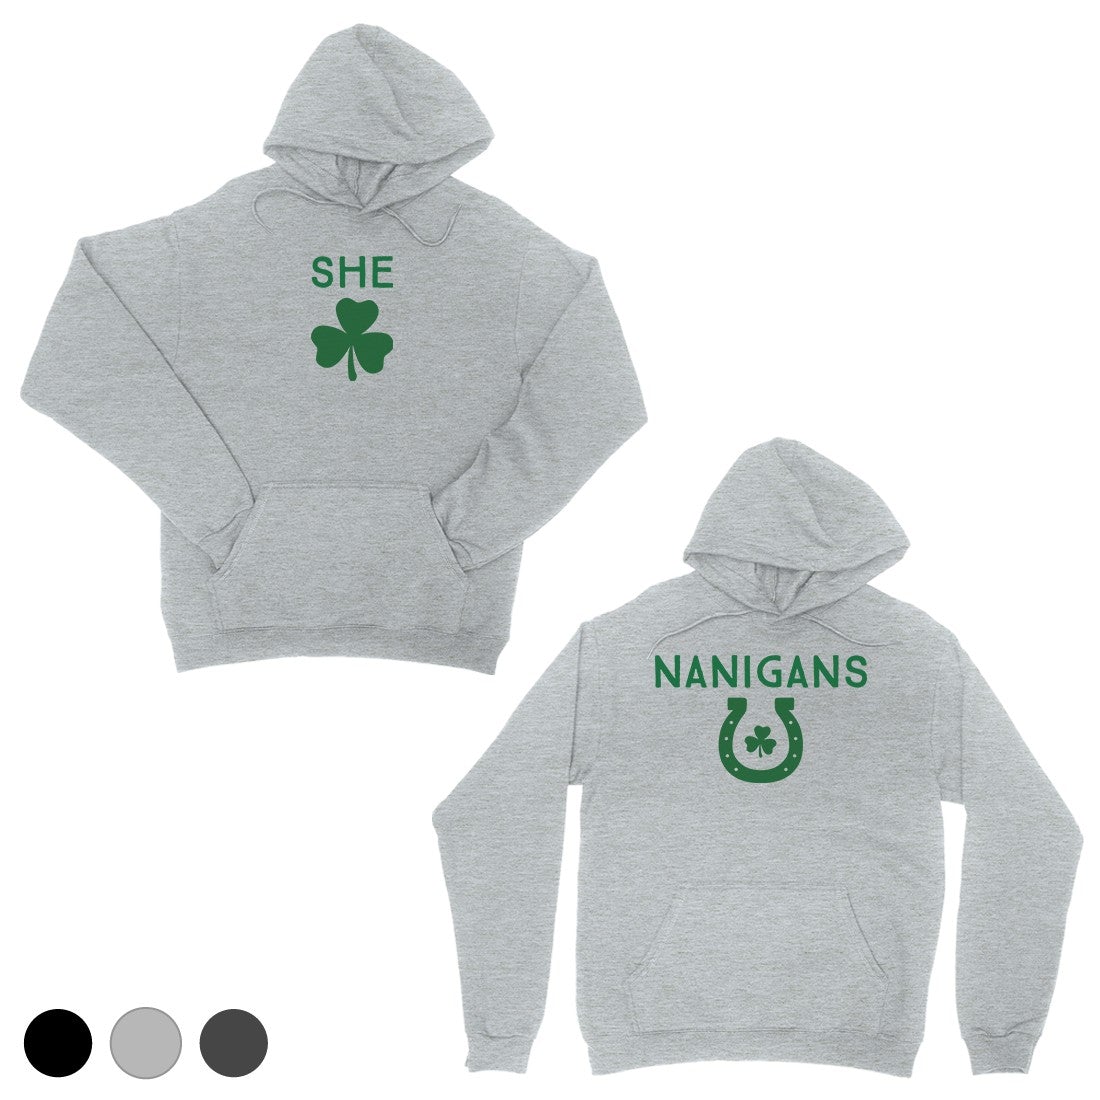 Shenanigans BFF Matching Hoodies Grey Funny St Patrick's Day Outfit